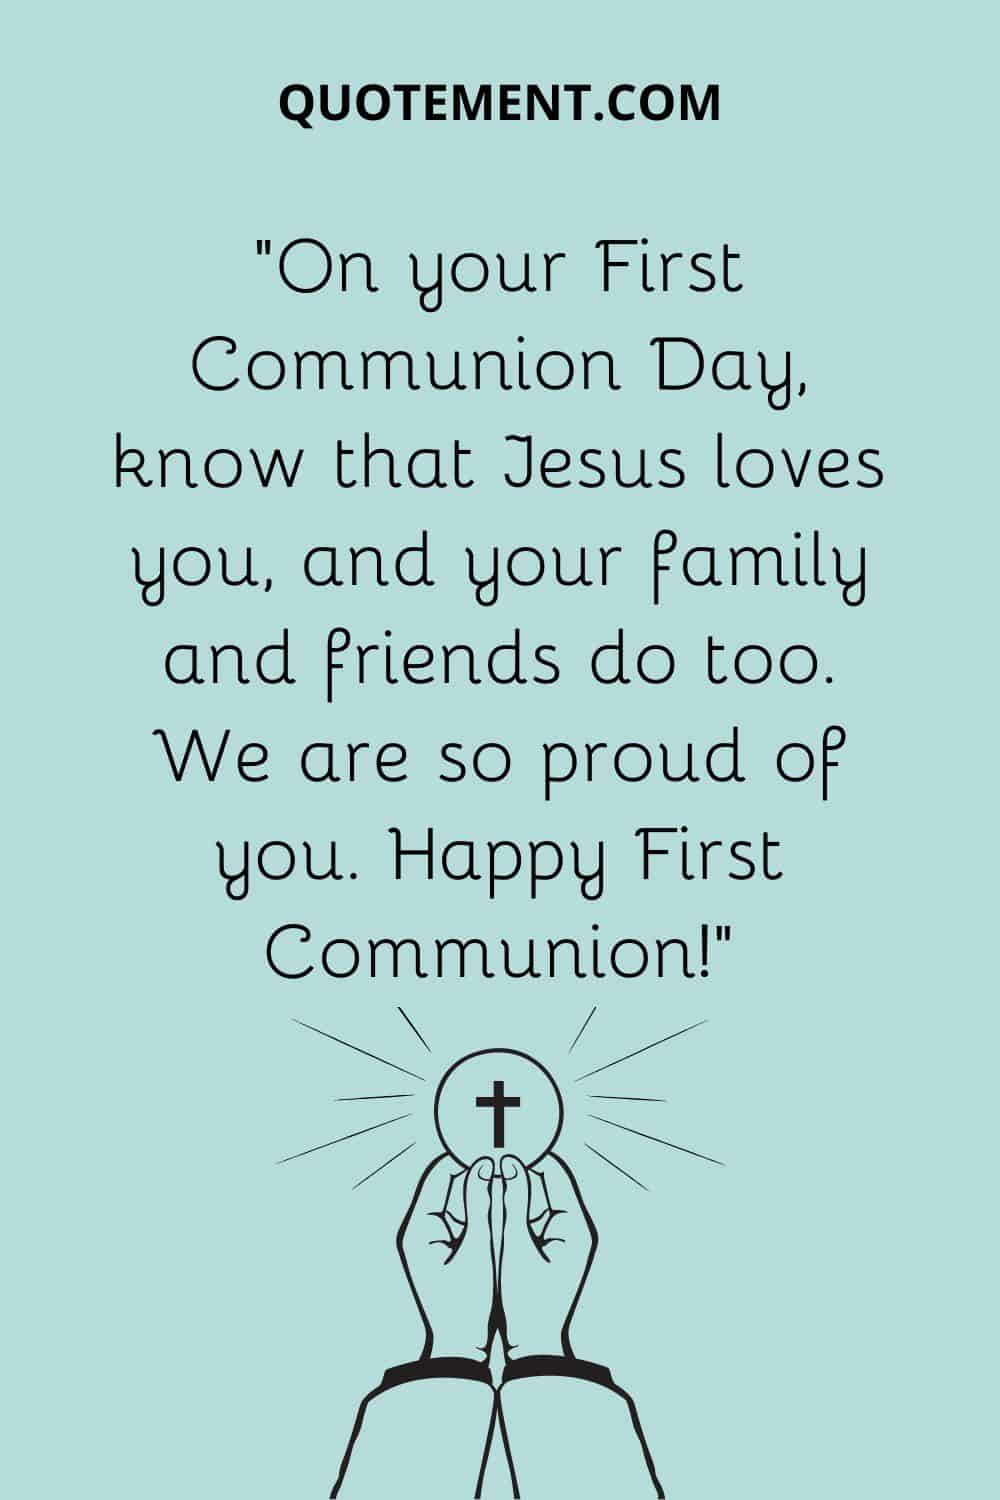 “On your First Communion Day, know that Jesus loves you, and your family and friends do too. We are so proud of you. Happy First Communion!”